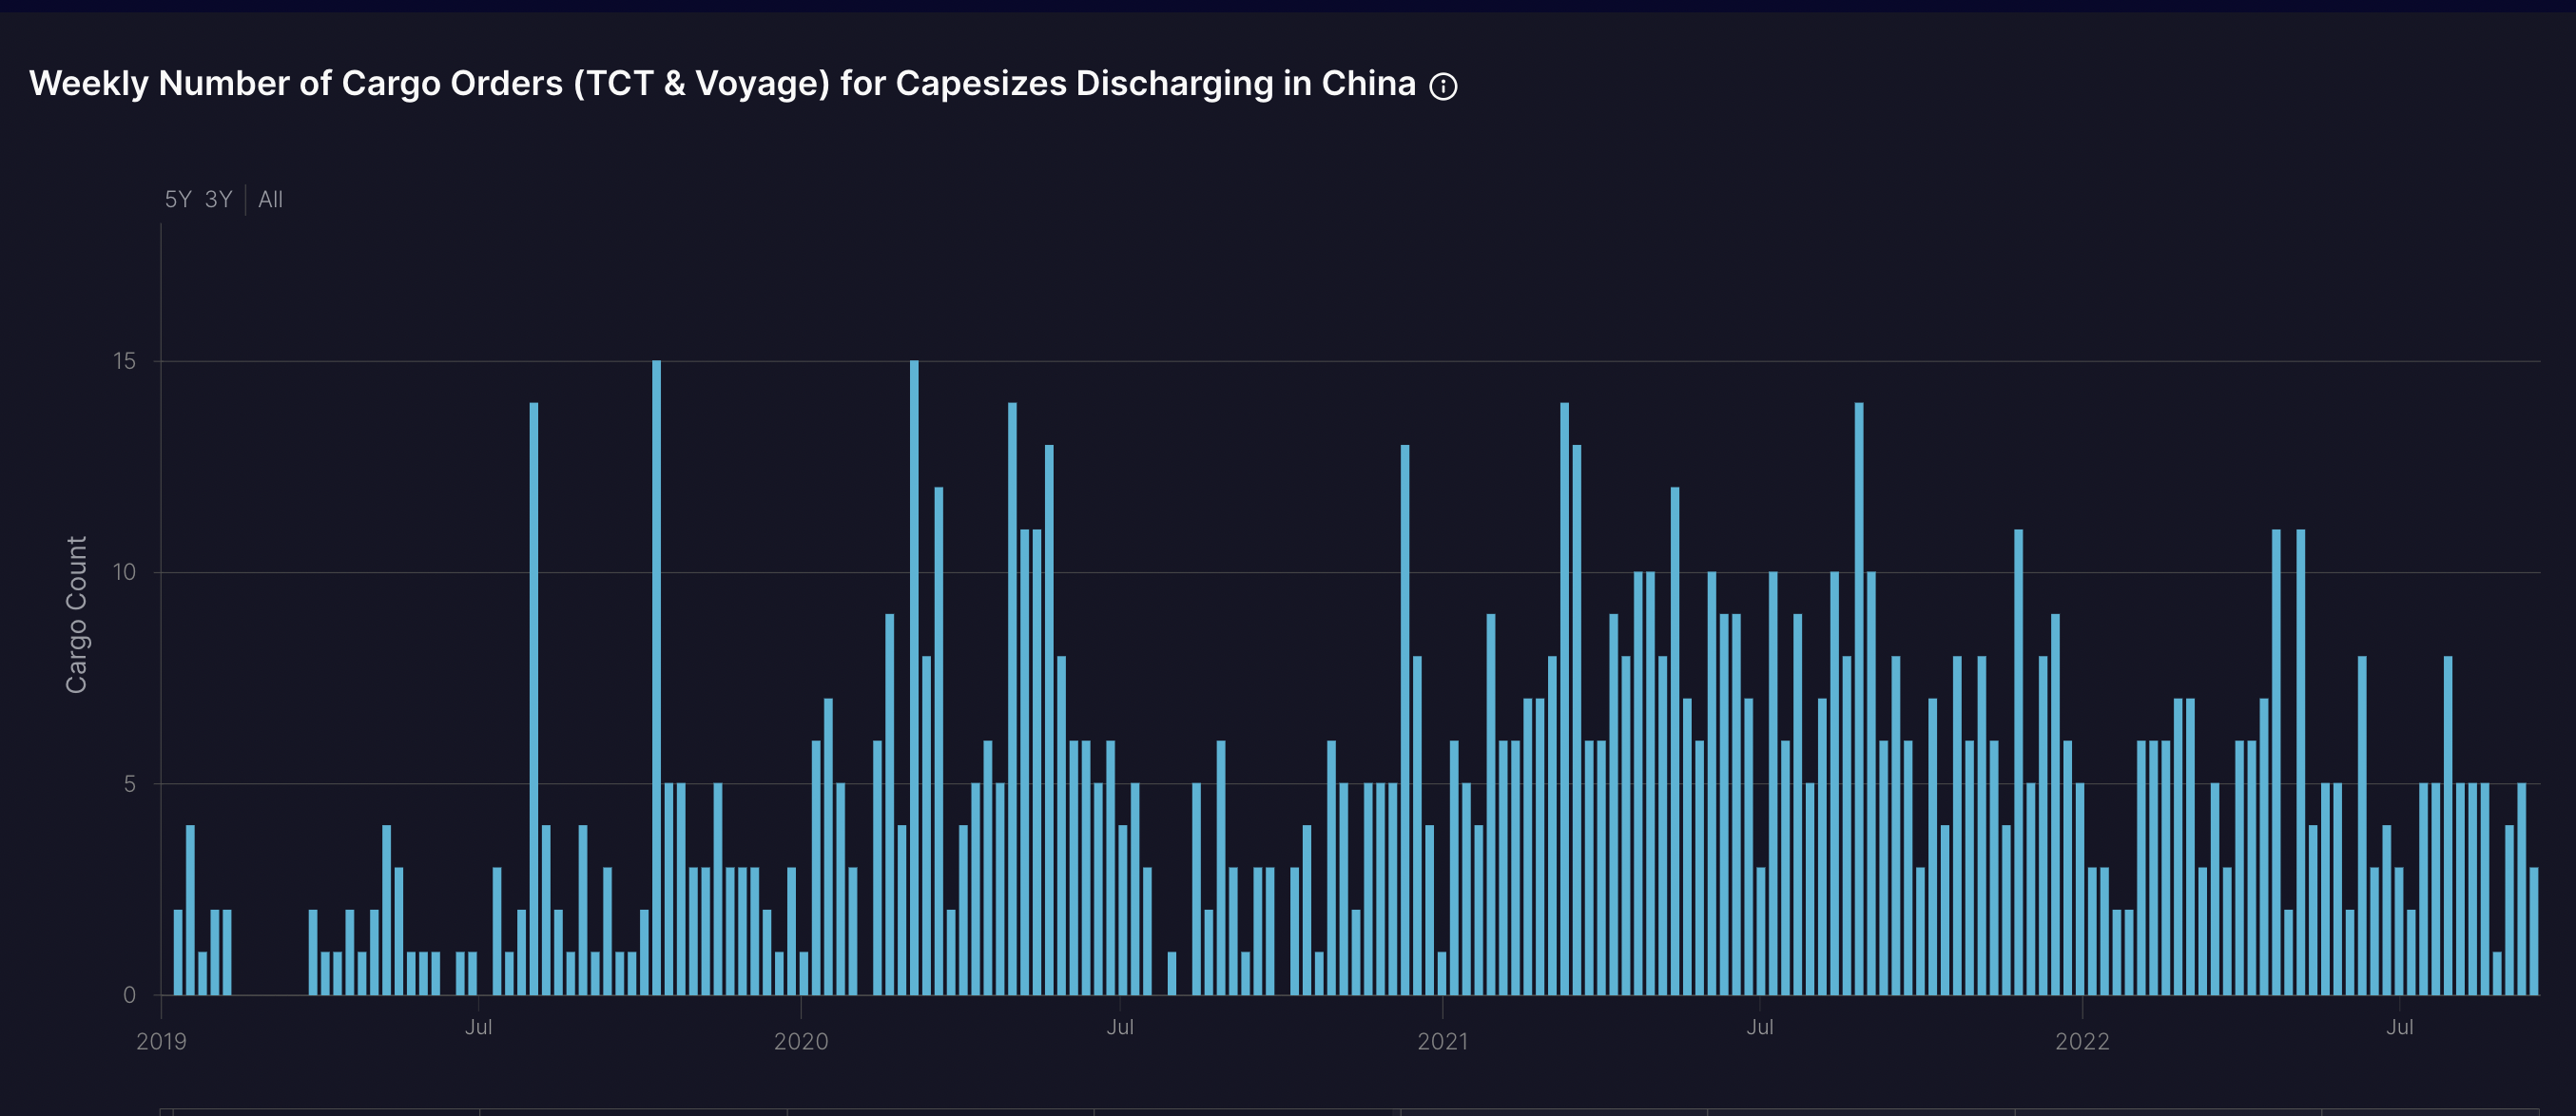 #17 Number of capesize orders for discharge in China